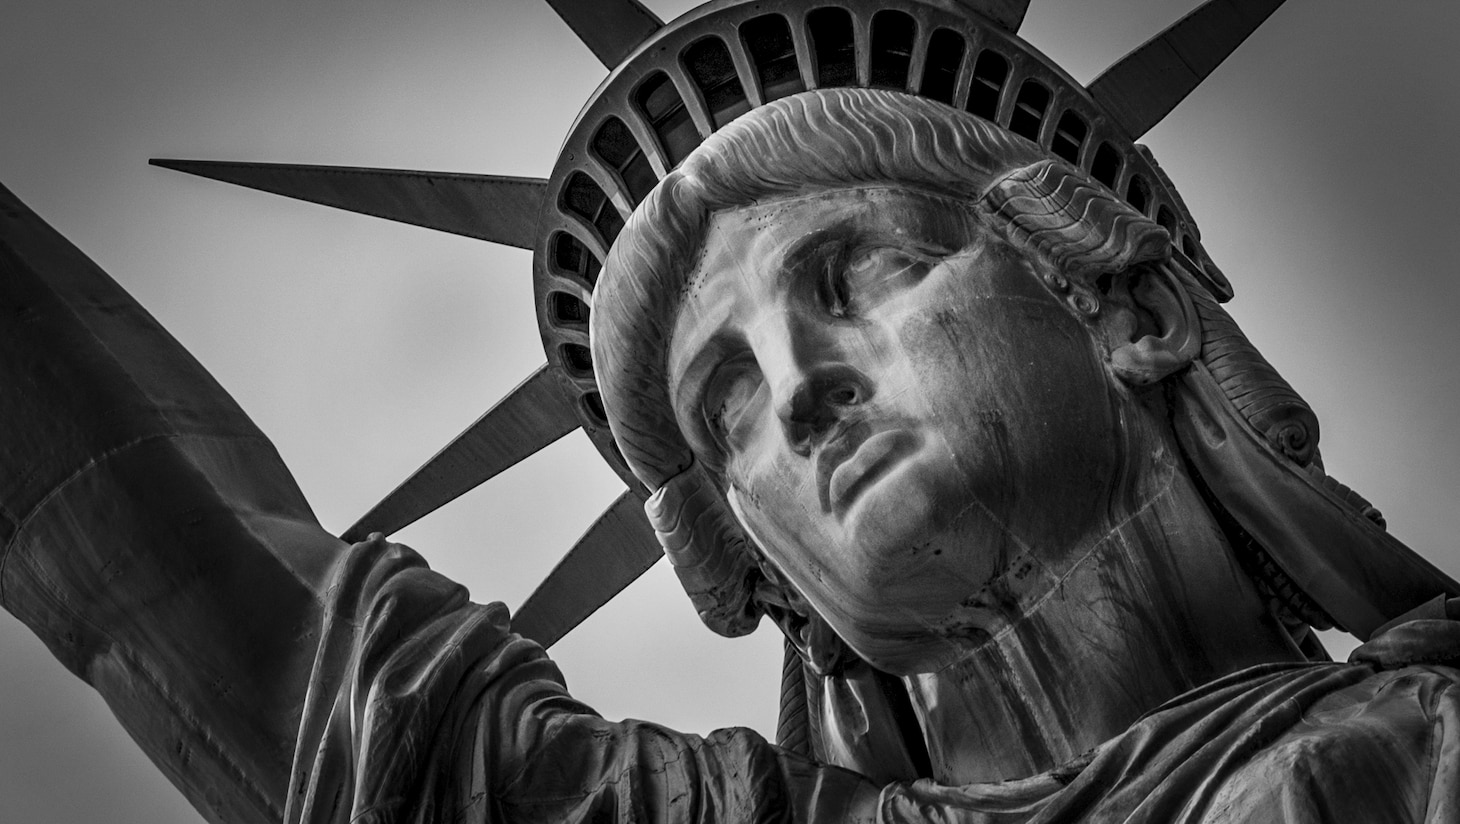 A close up of the statue of liberty's face.